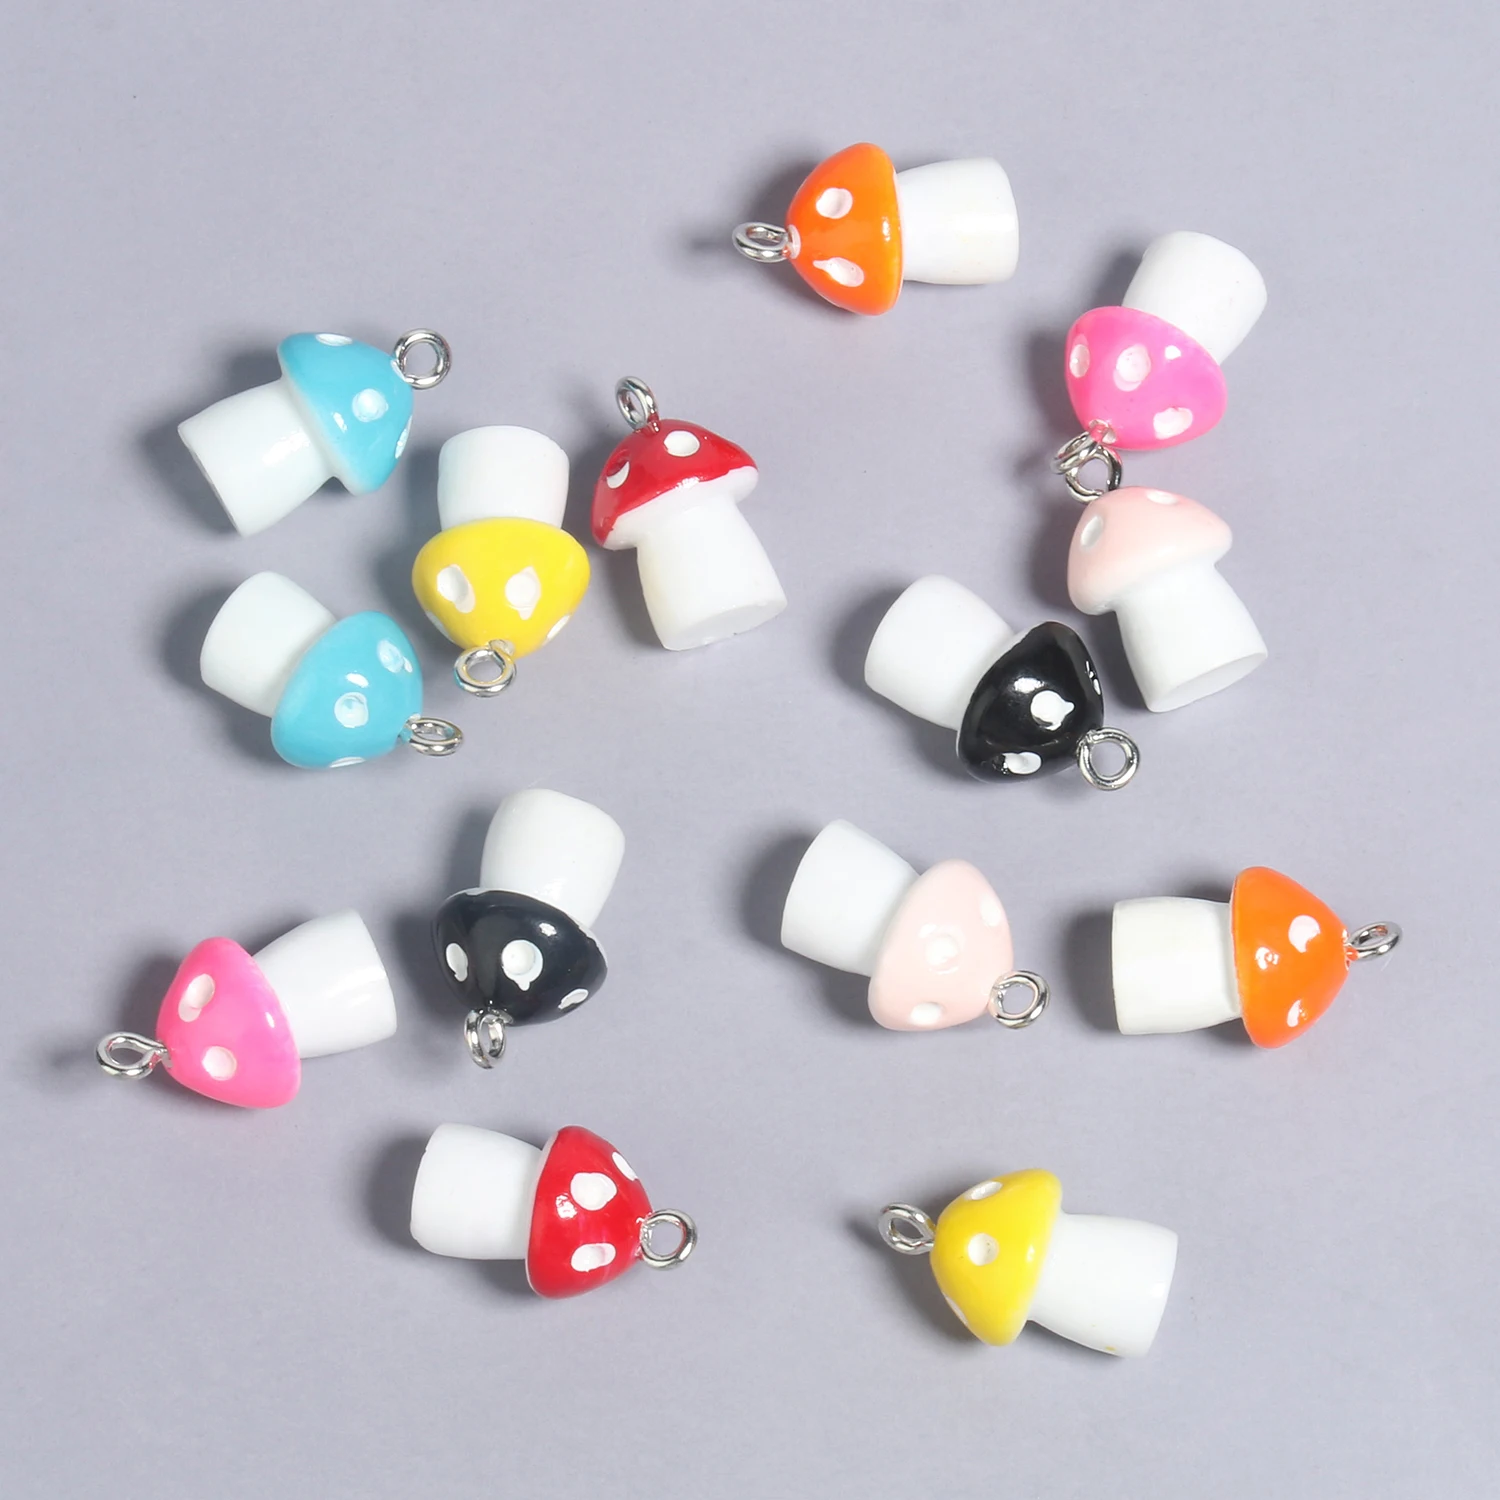 

10pcs Mixed Color Mushroom Shape Charms Pendant Beads Cute Cherry Pendants for Jewelry Earrings Necklace Making DIY Handmade